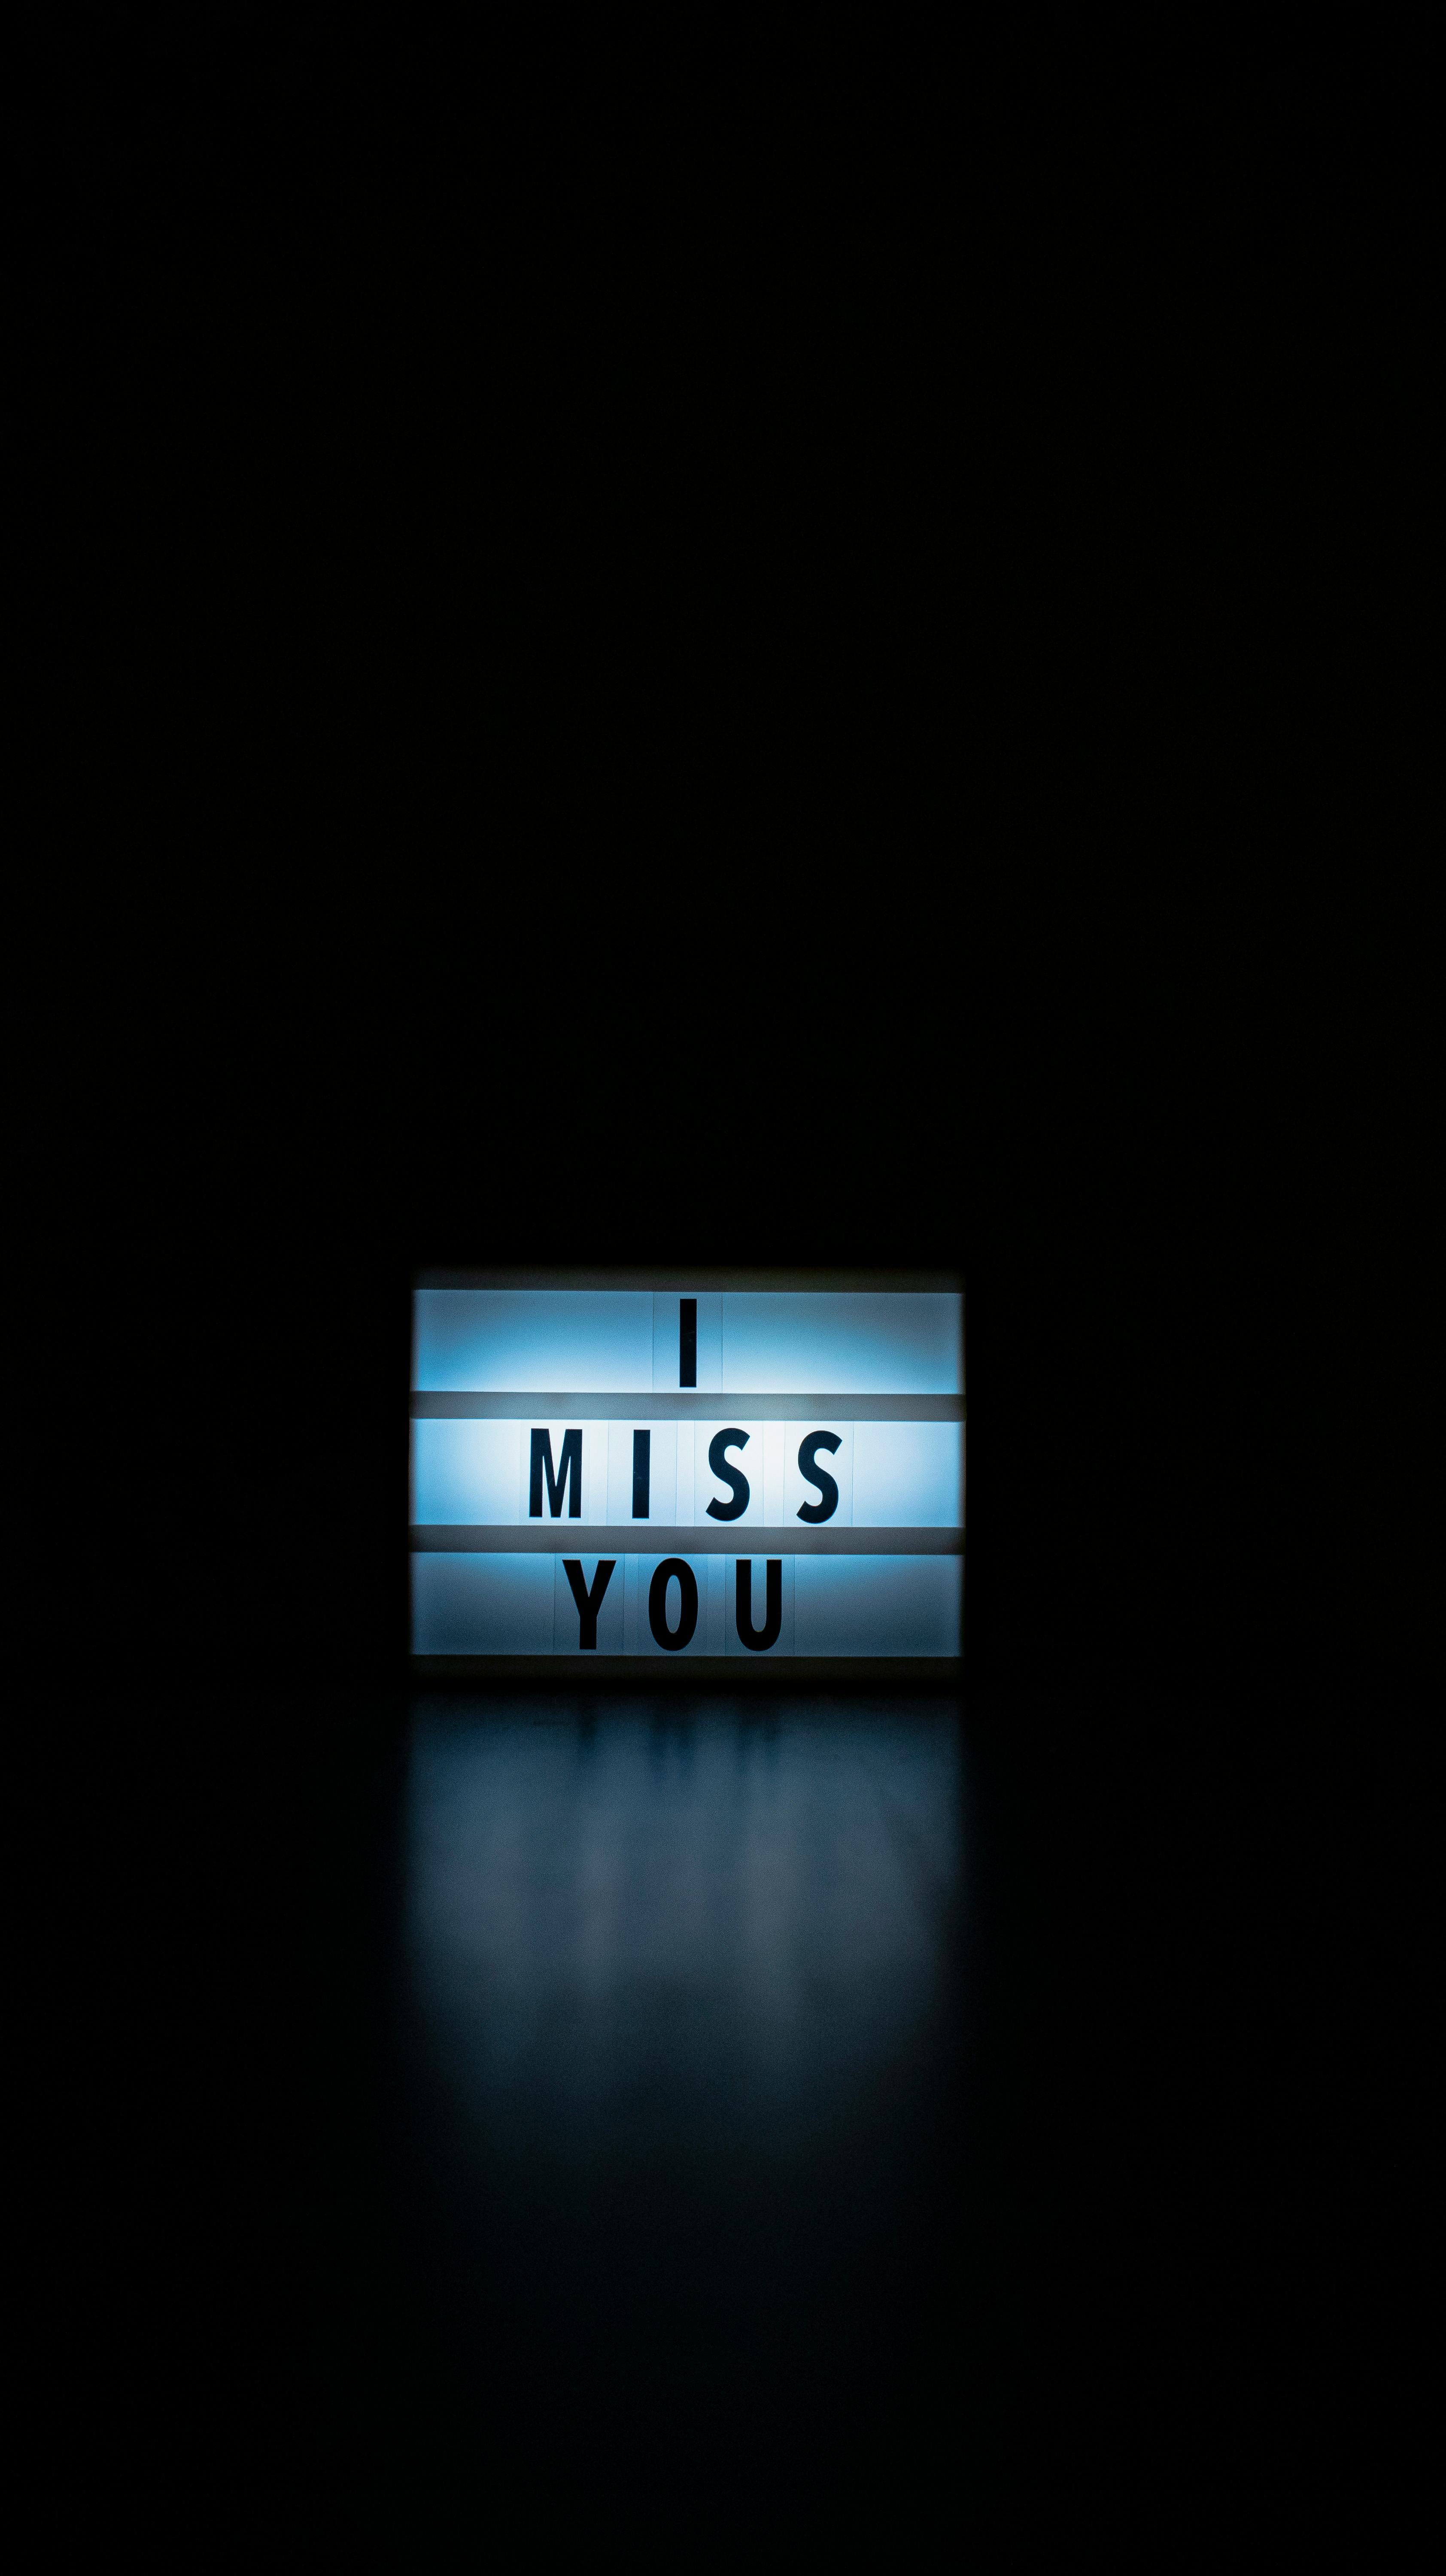 missing you images